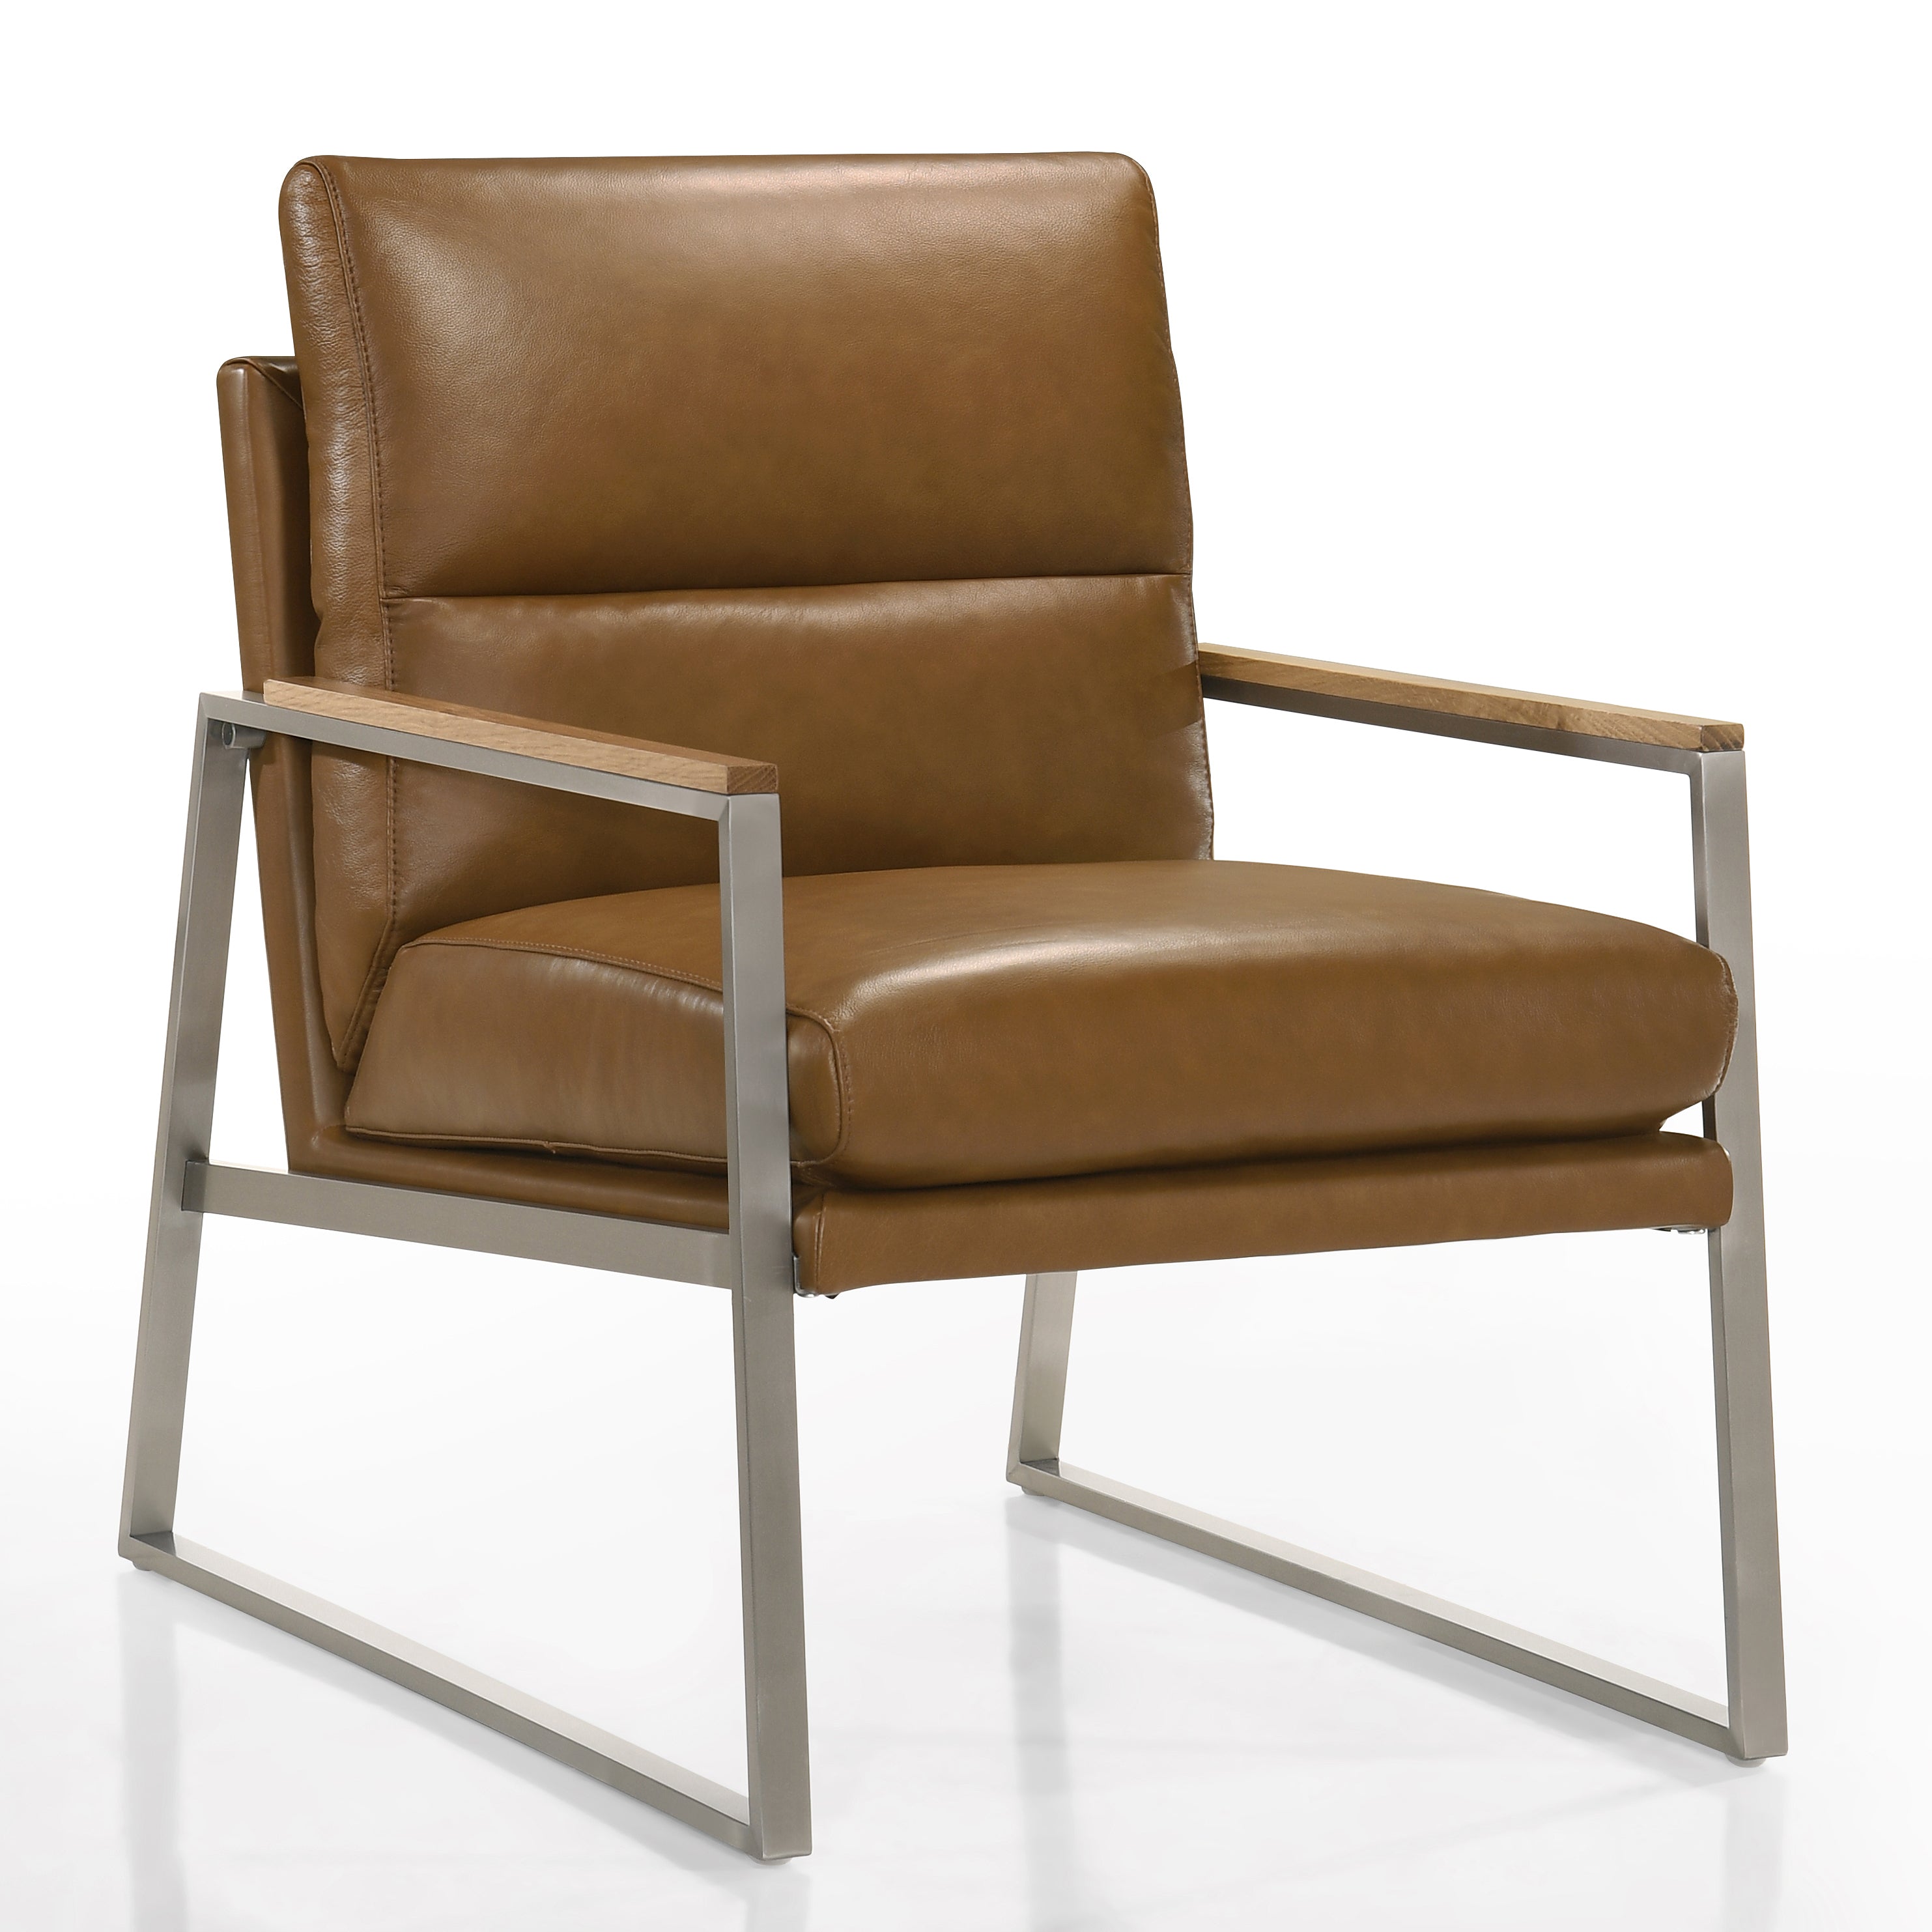 Colin Stainless Steel & Genuine Leather Accent Chair, Caramel Brown